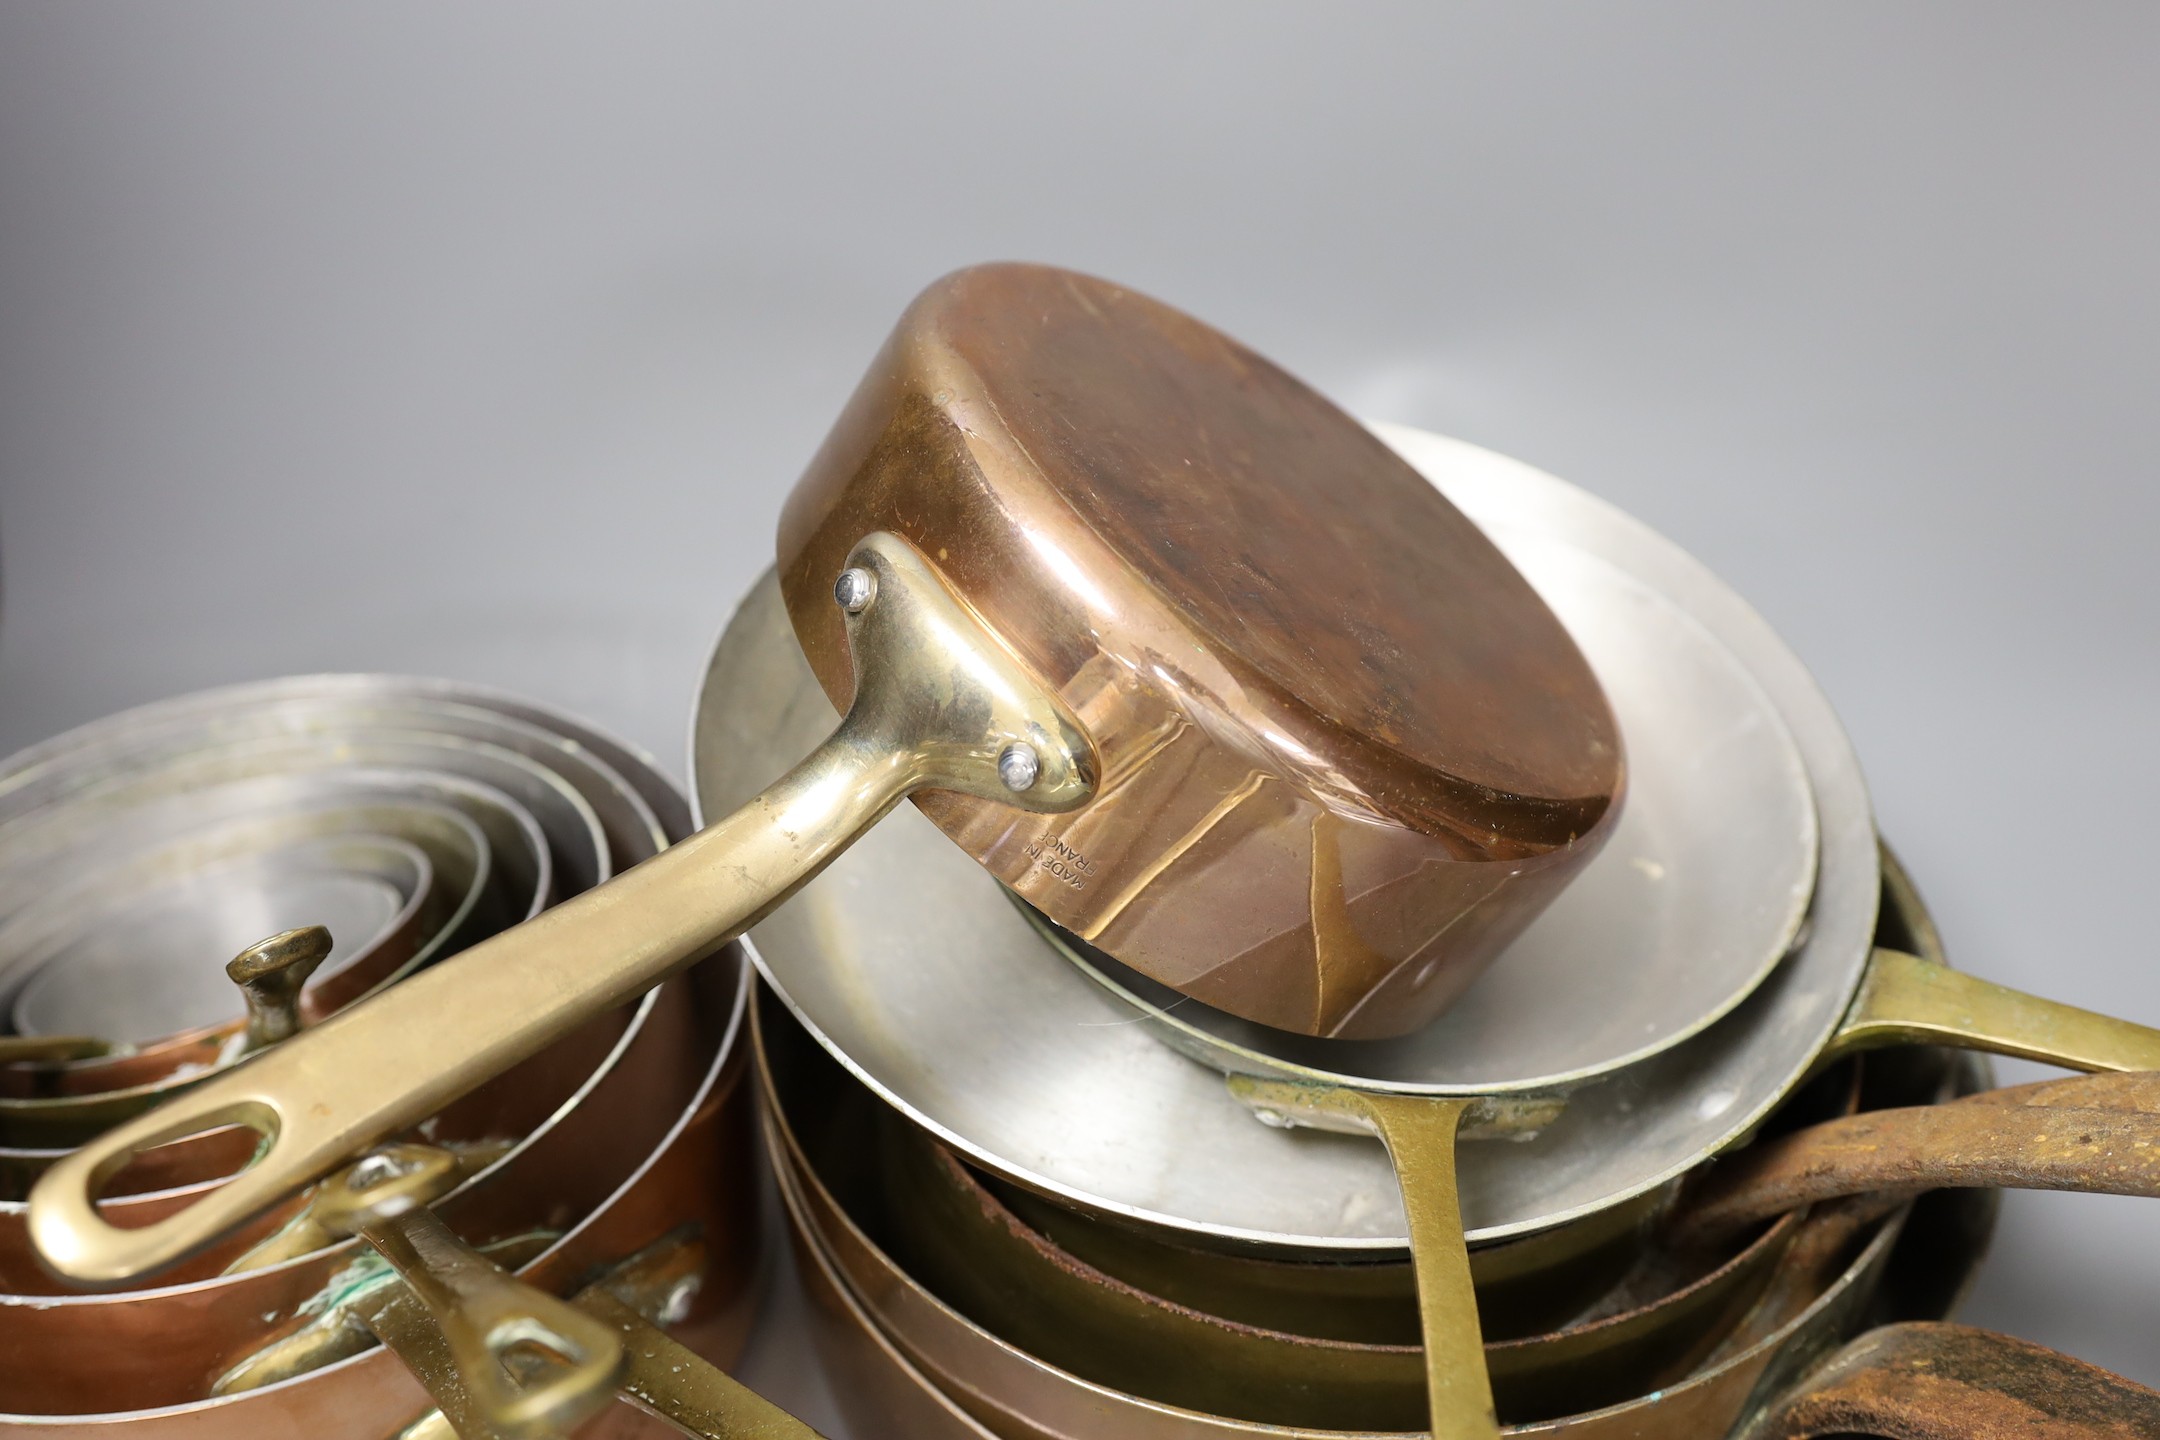 Batterie de cuisine, A collection of graduated French copper pots and pans - Image 3 of 3